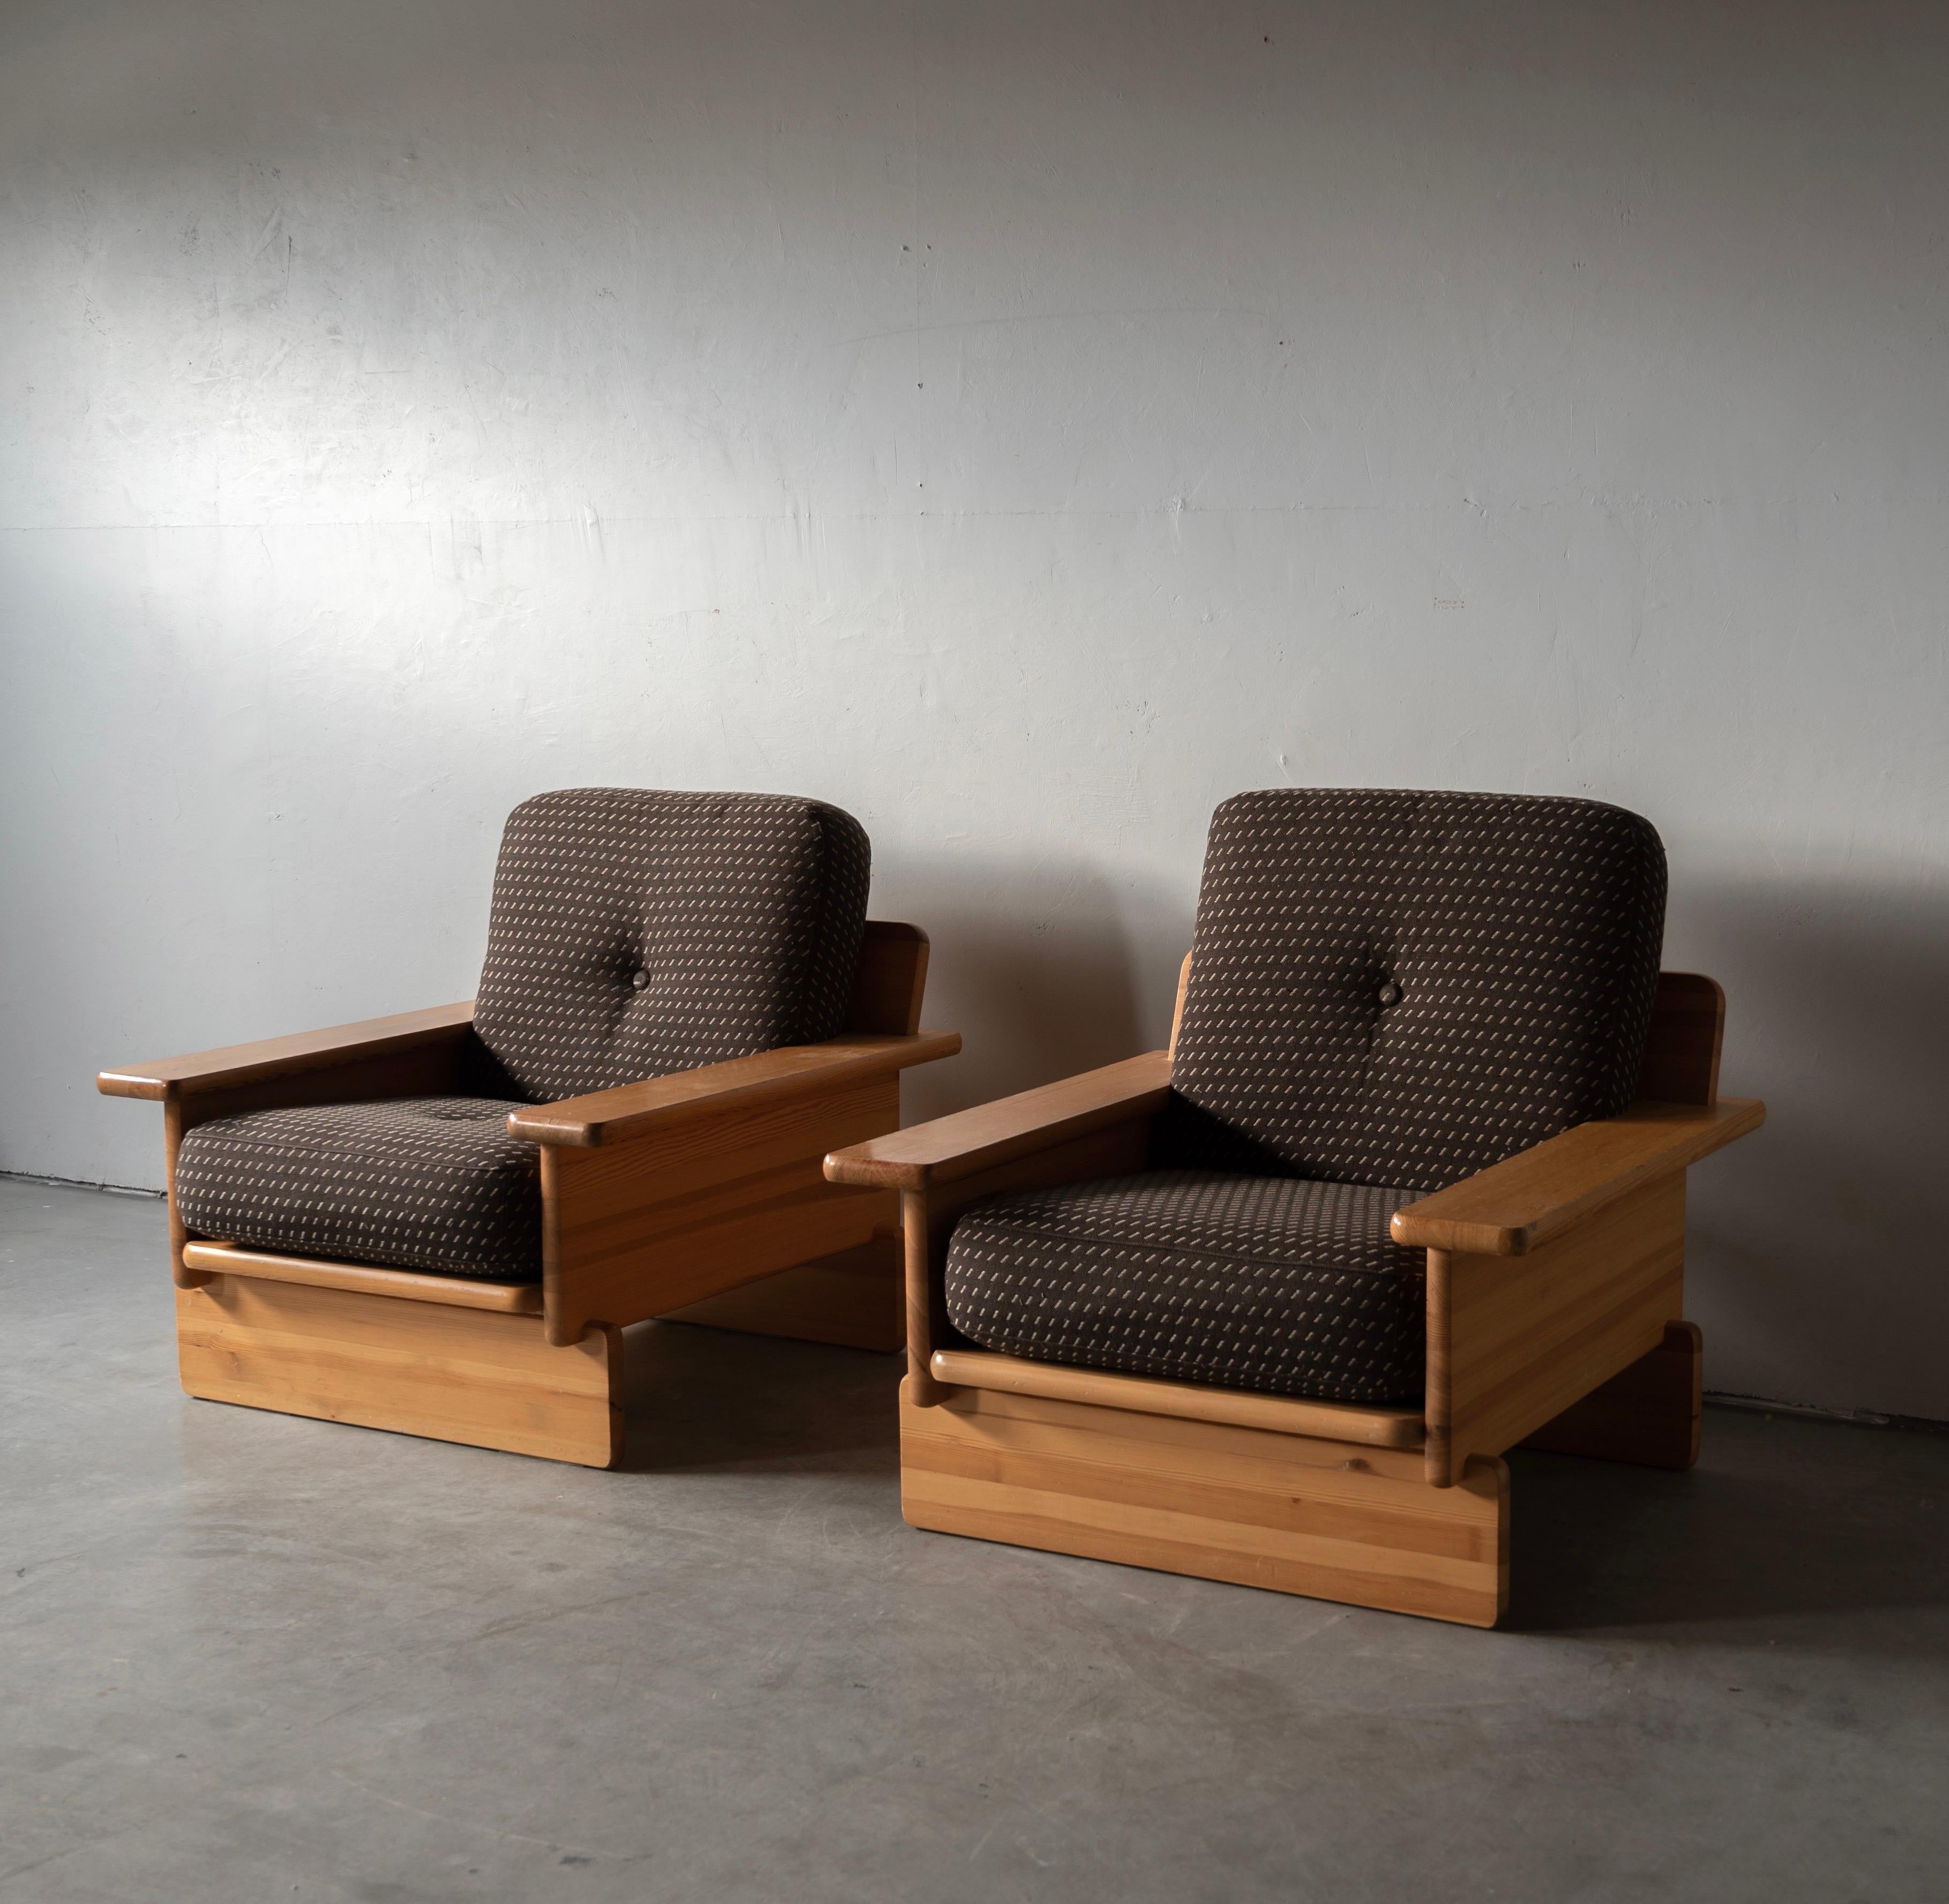 Finnish Swedish Cabinetmaker, Lounge Chairs, Solid Pine, Brown Fabric, Finland, c. 1970s For Sale